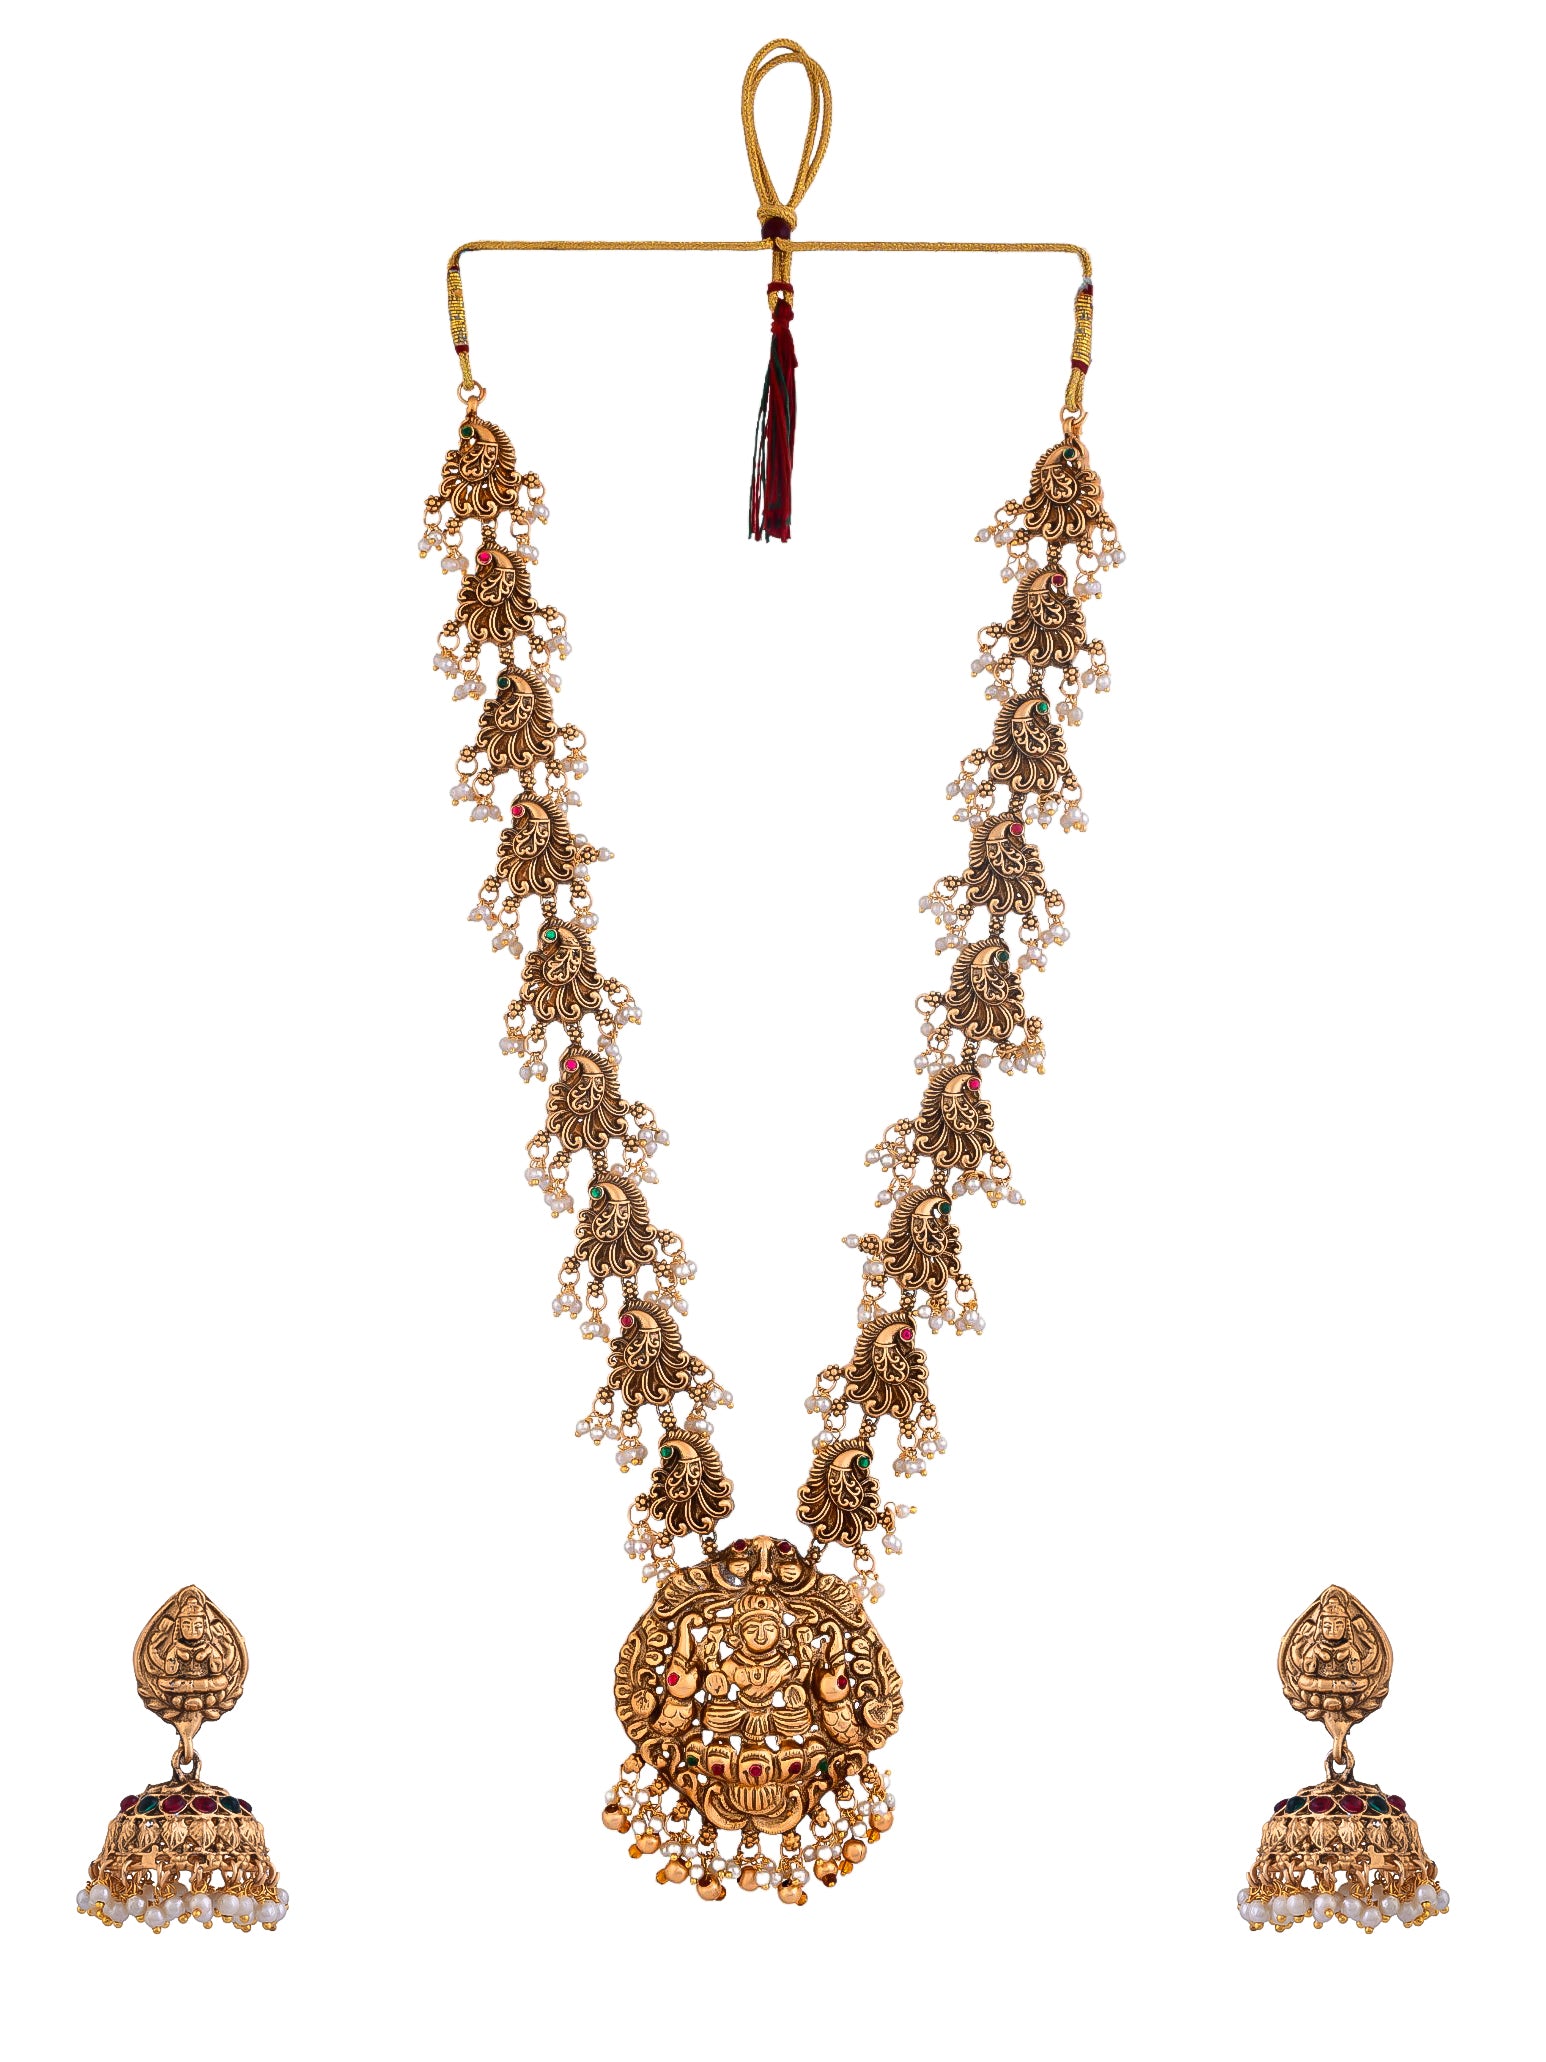 Gold Tone Beautifully Crafted Temple Necklace with earrings